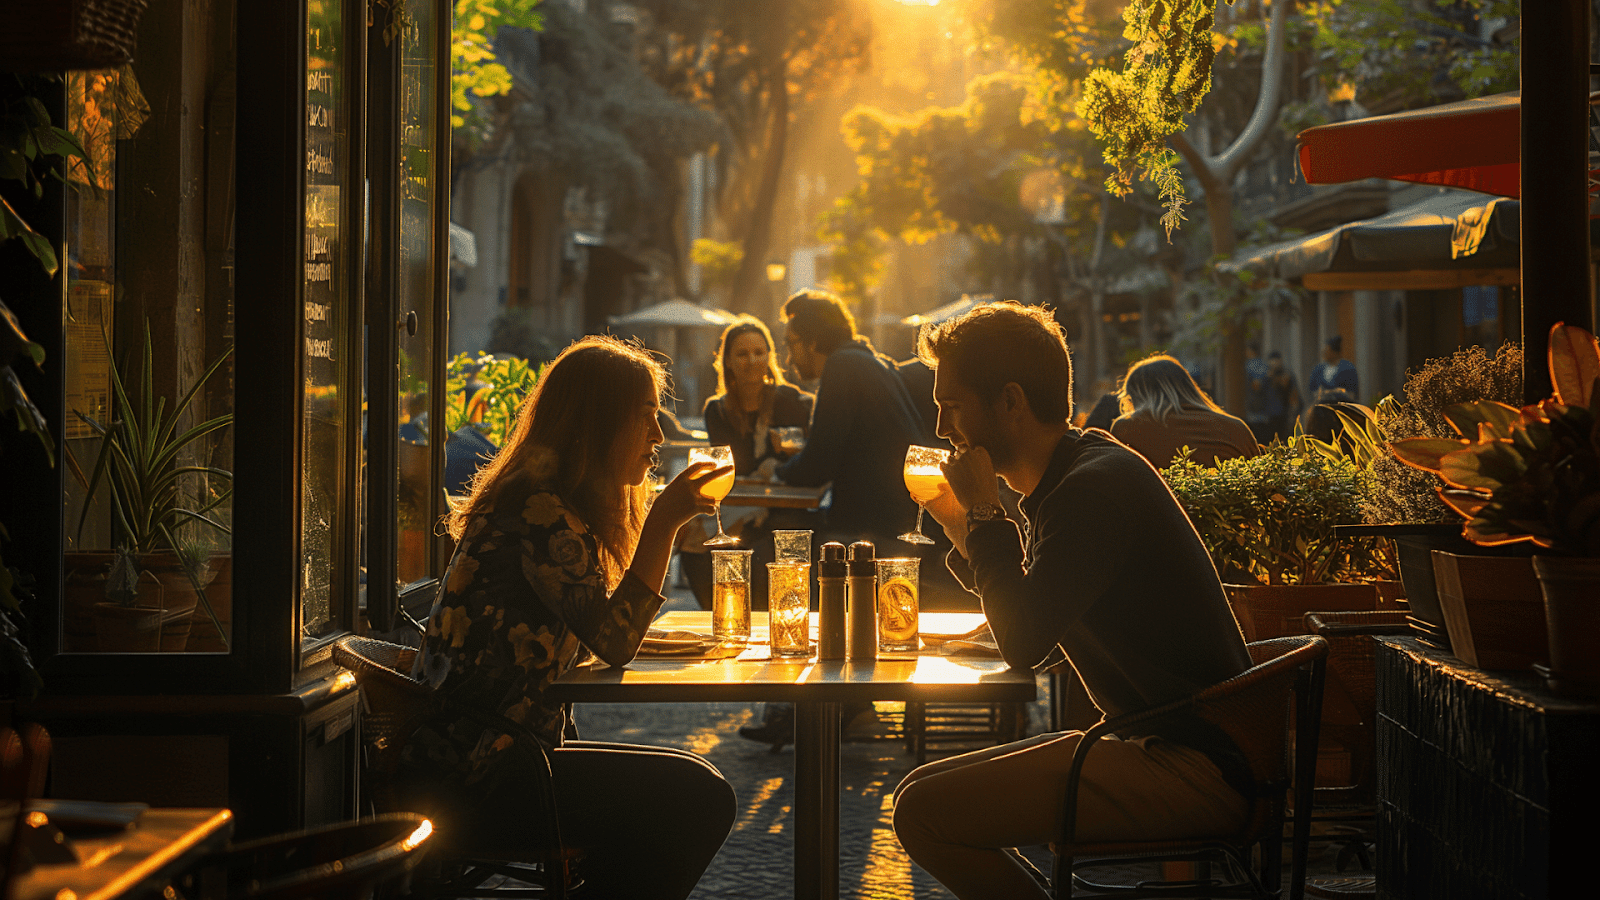 A couple dining at an outdoor cafe during golden hour.